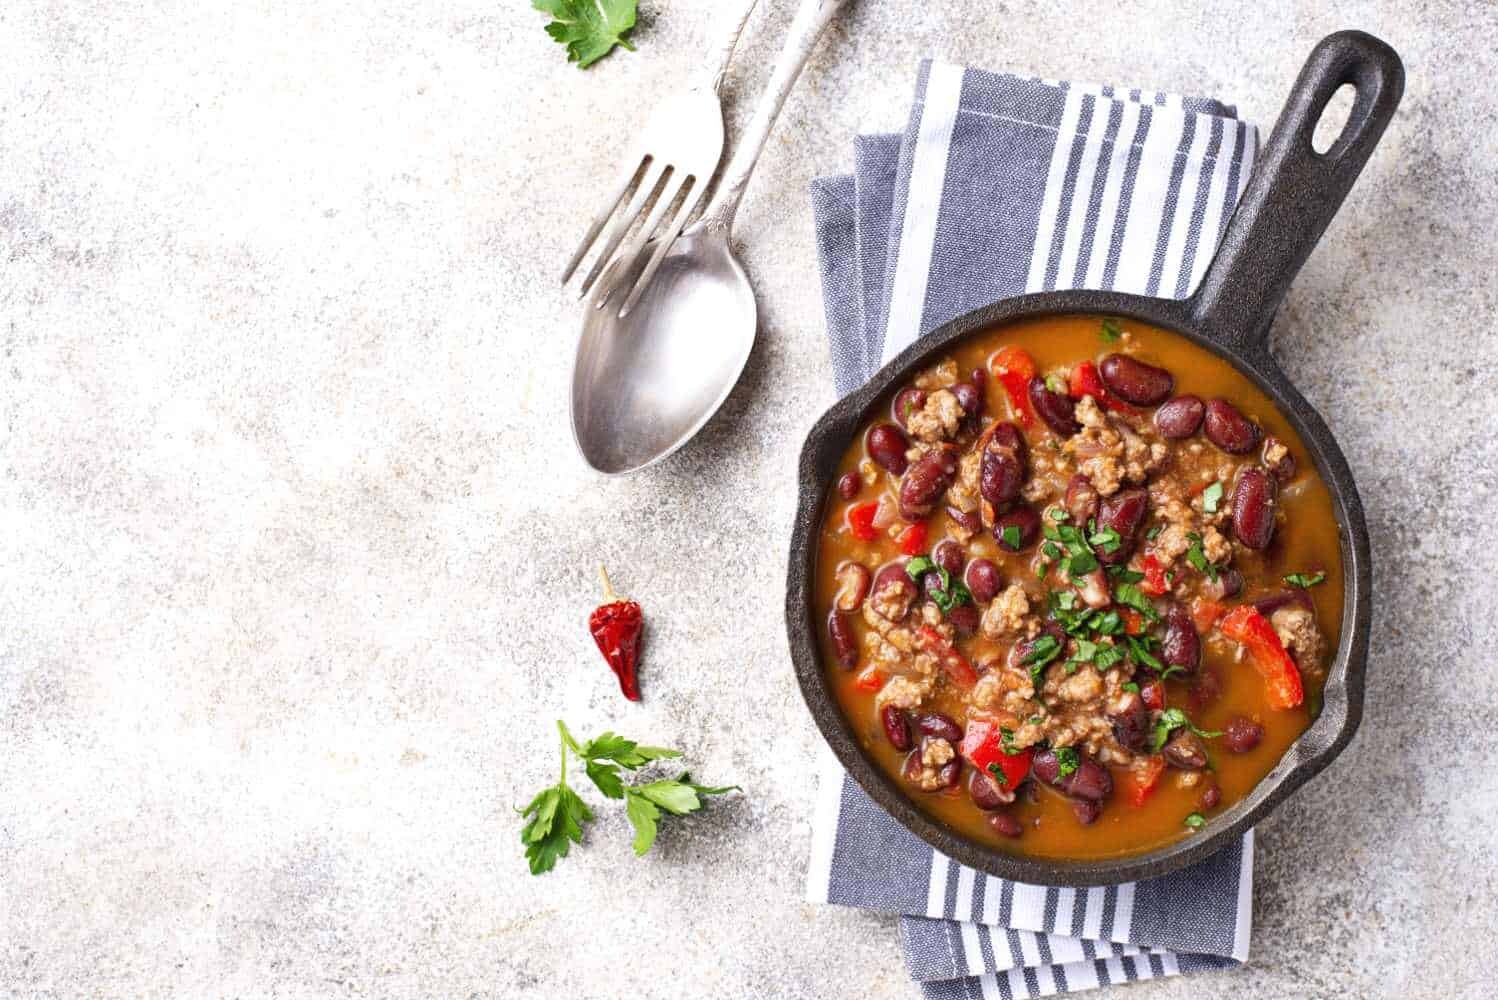 Low Carb Chili Con Carne